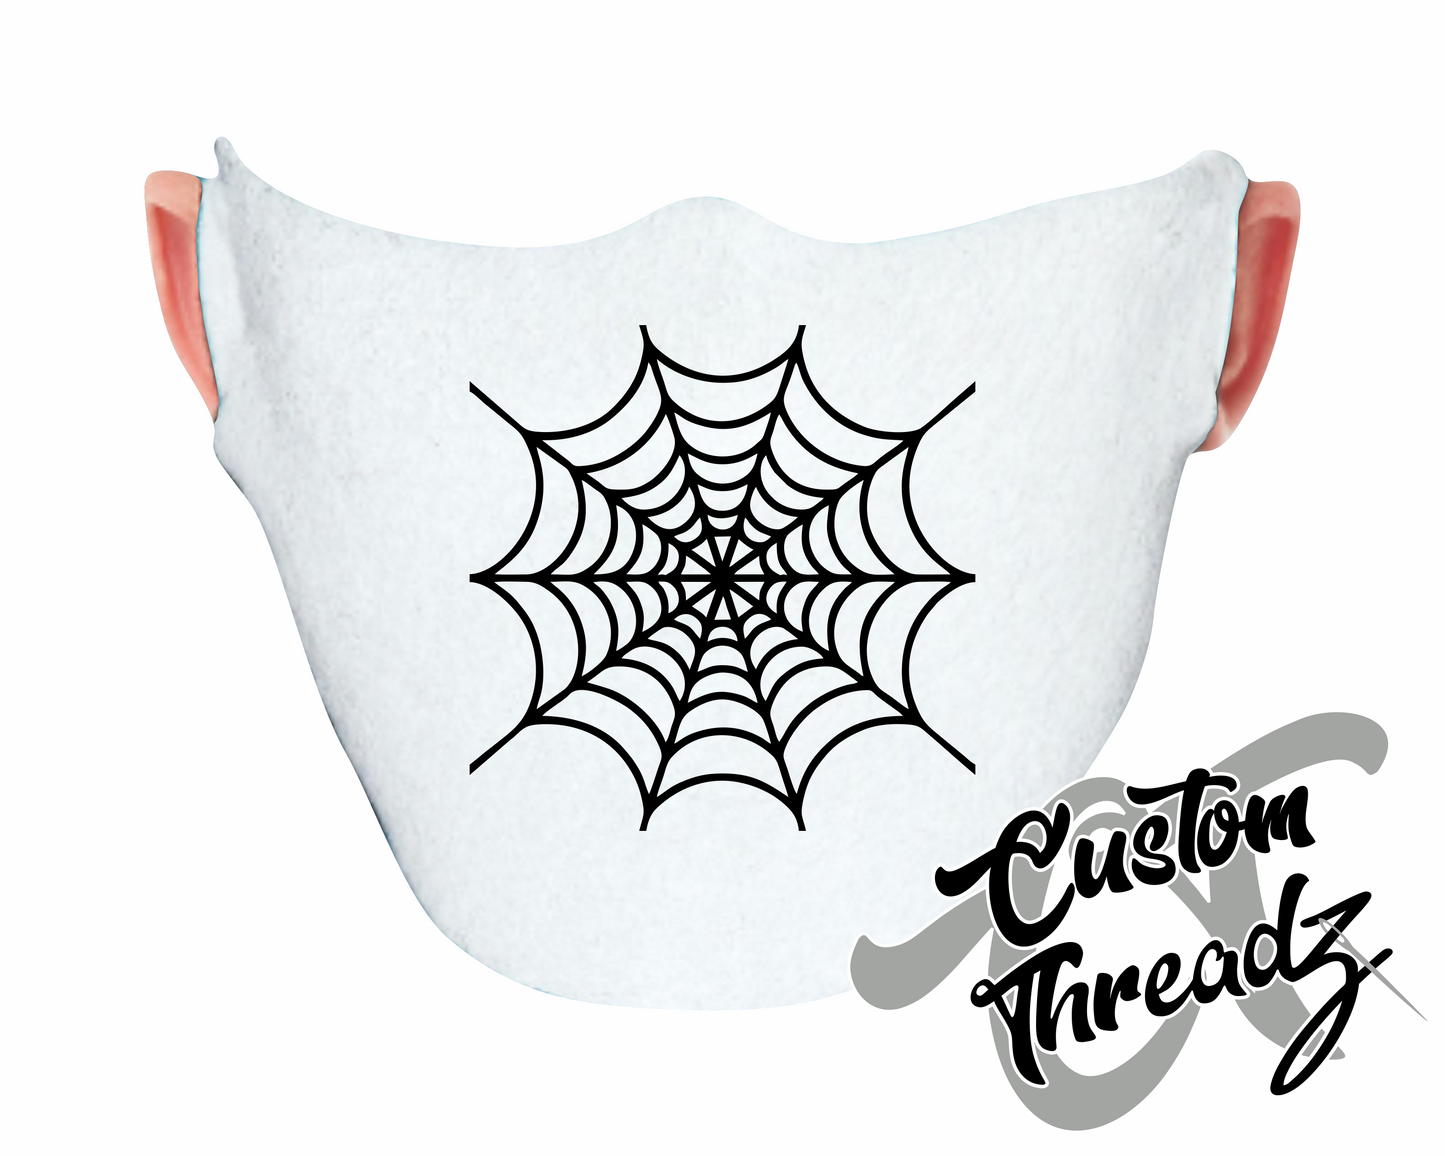 white face mask with spiderweb DTG printed design